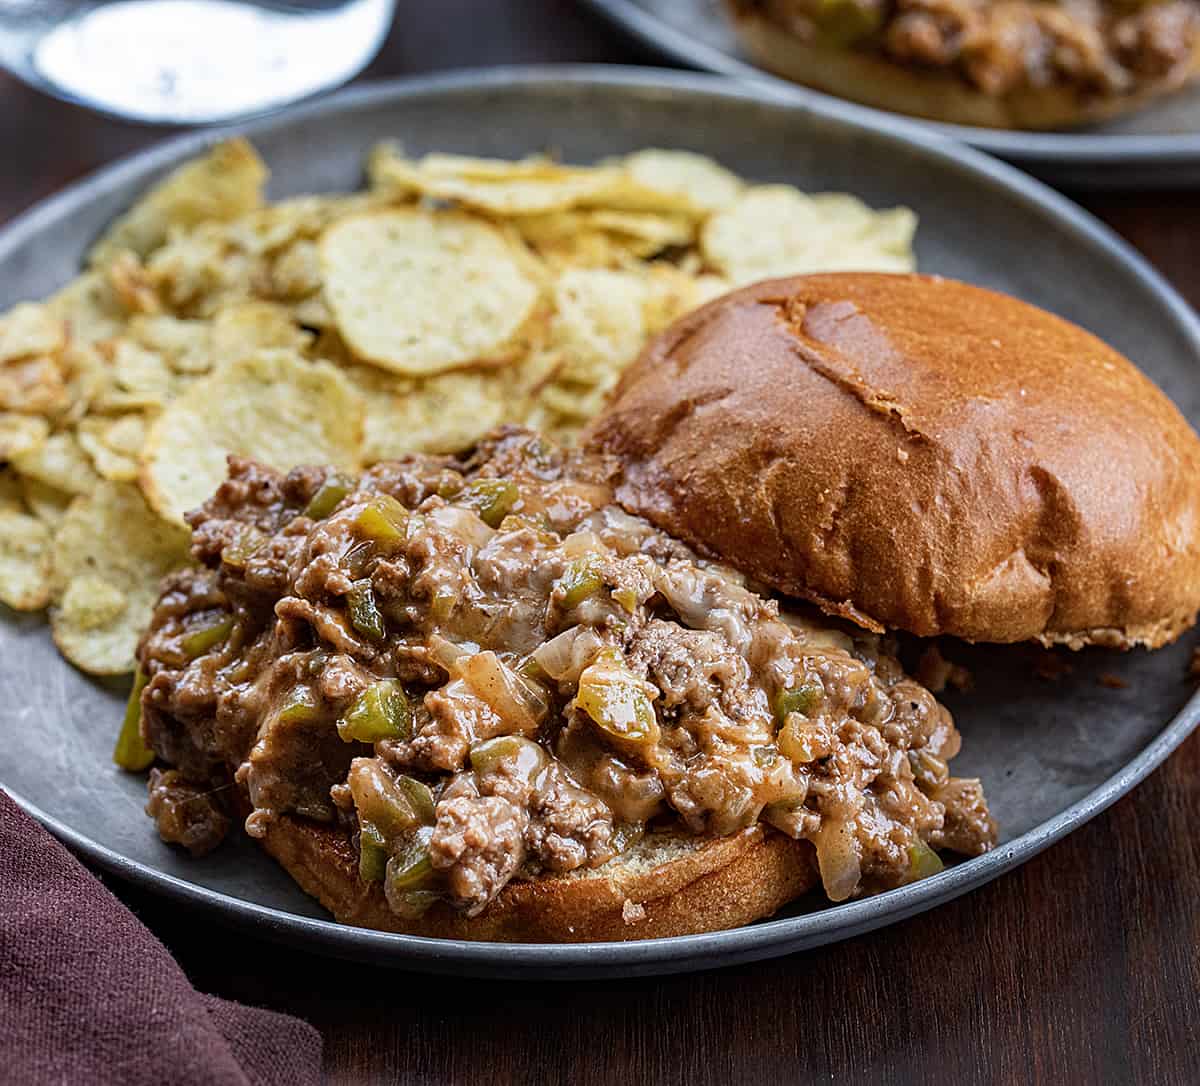 Philly Cheesesteak Sloppy Joe on a Plate with Chips.